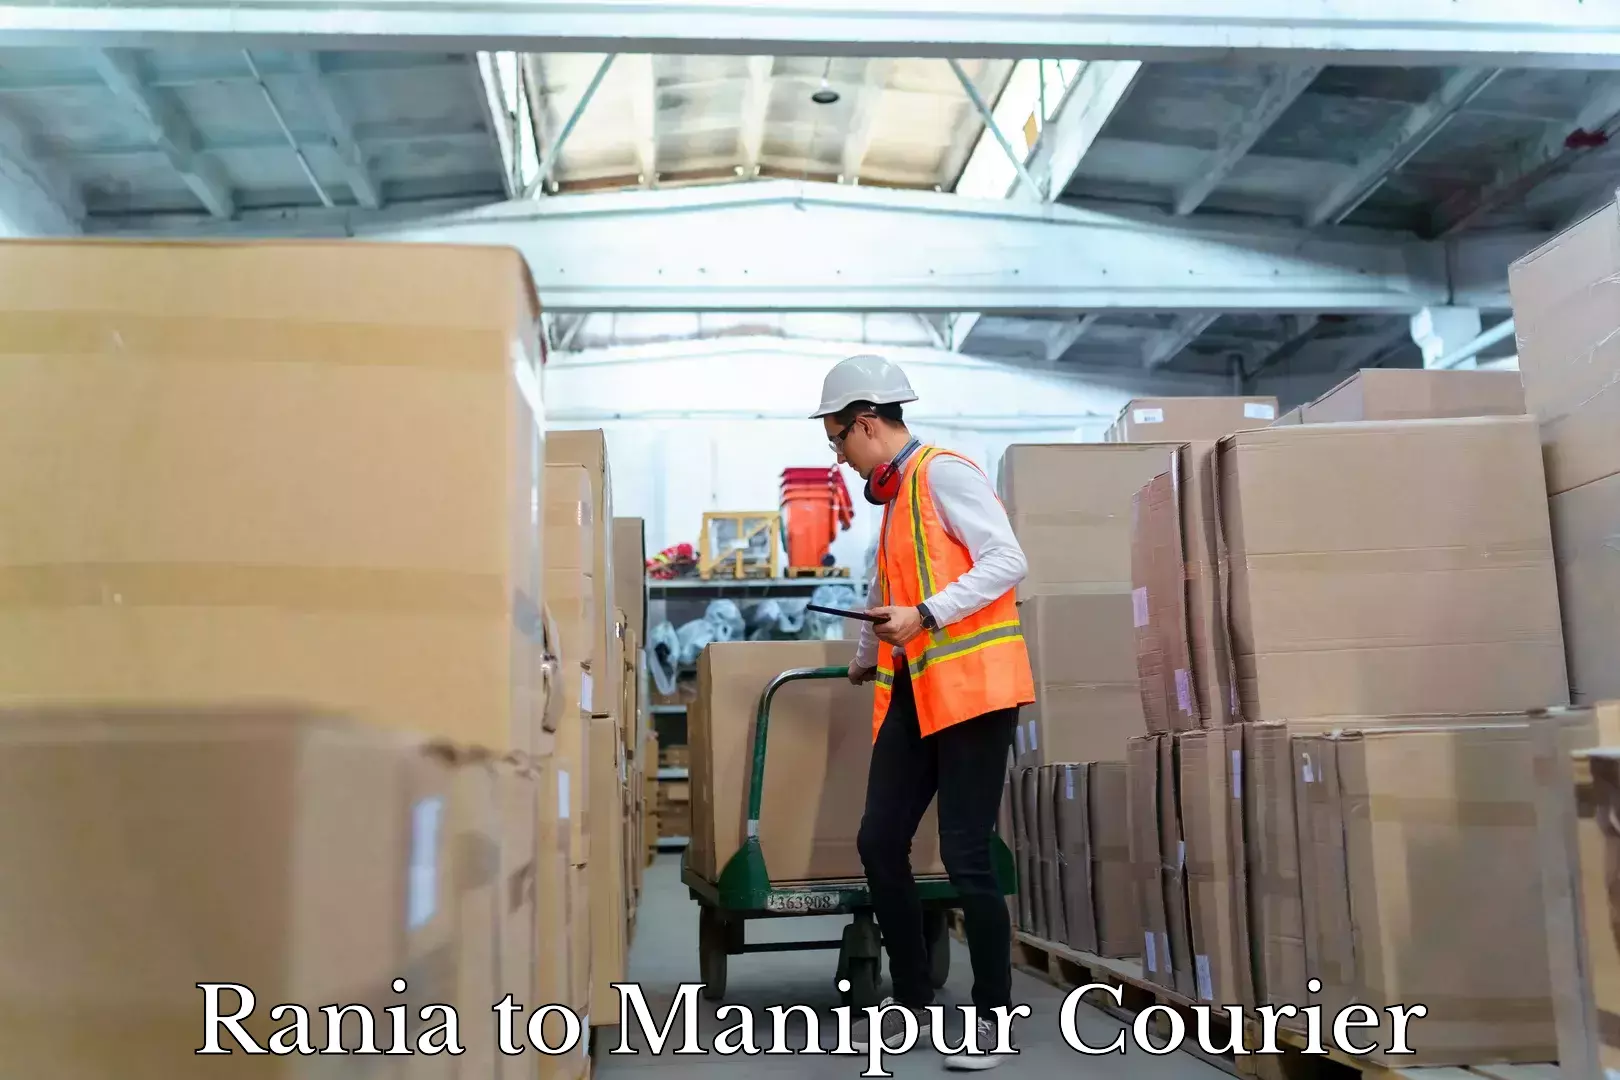 Efficient order fulfillment Rania to Manipur